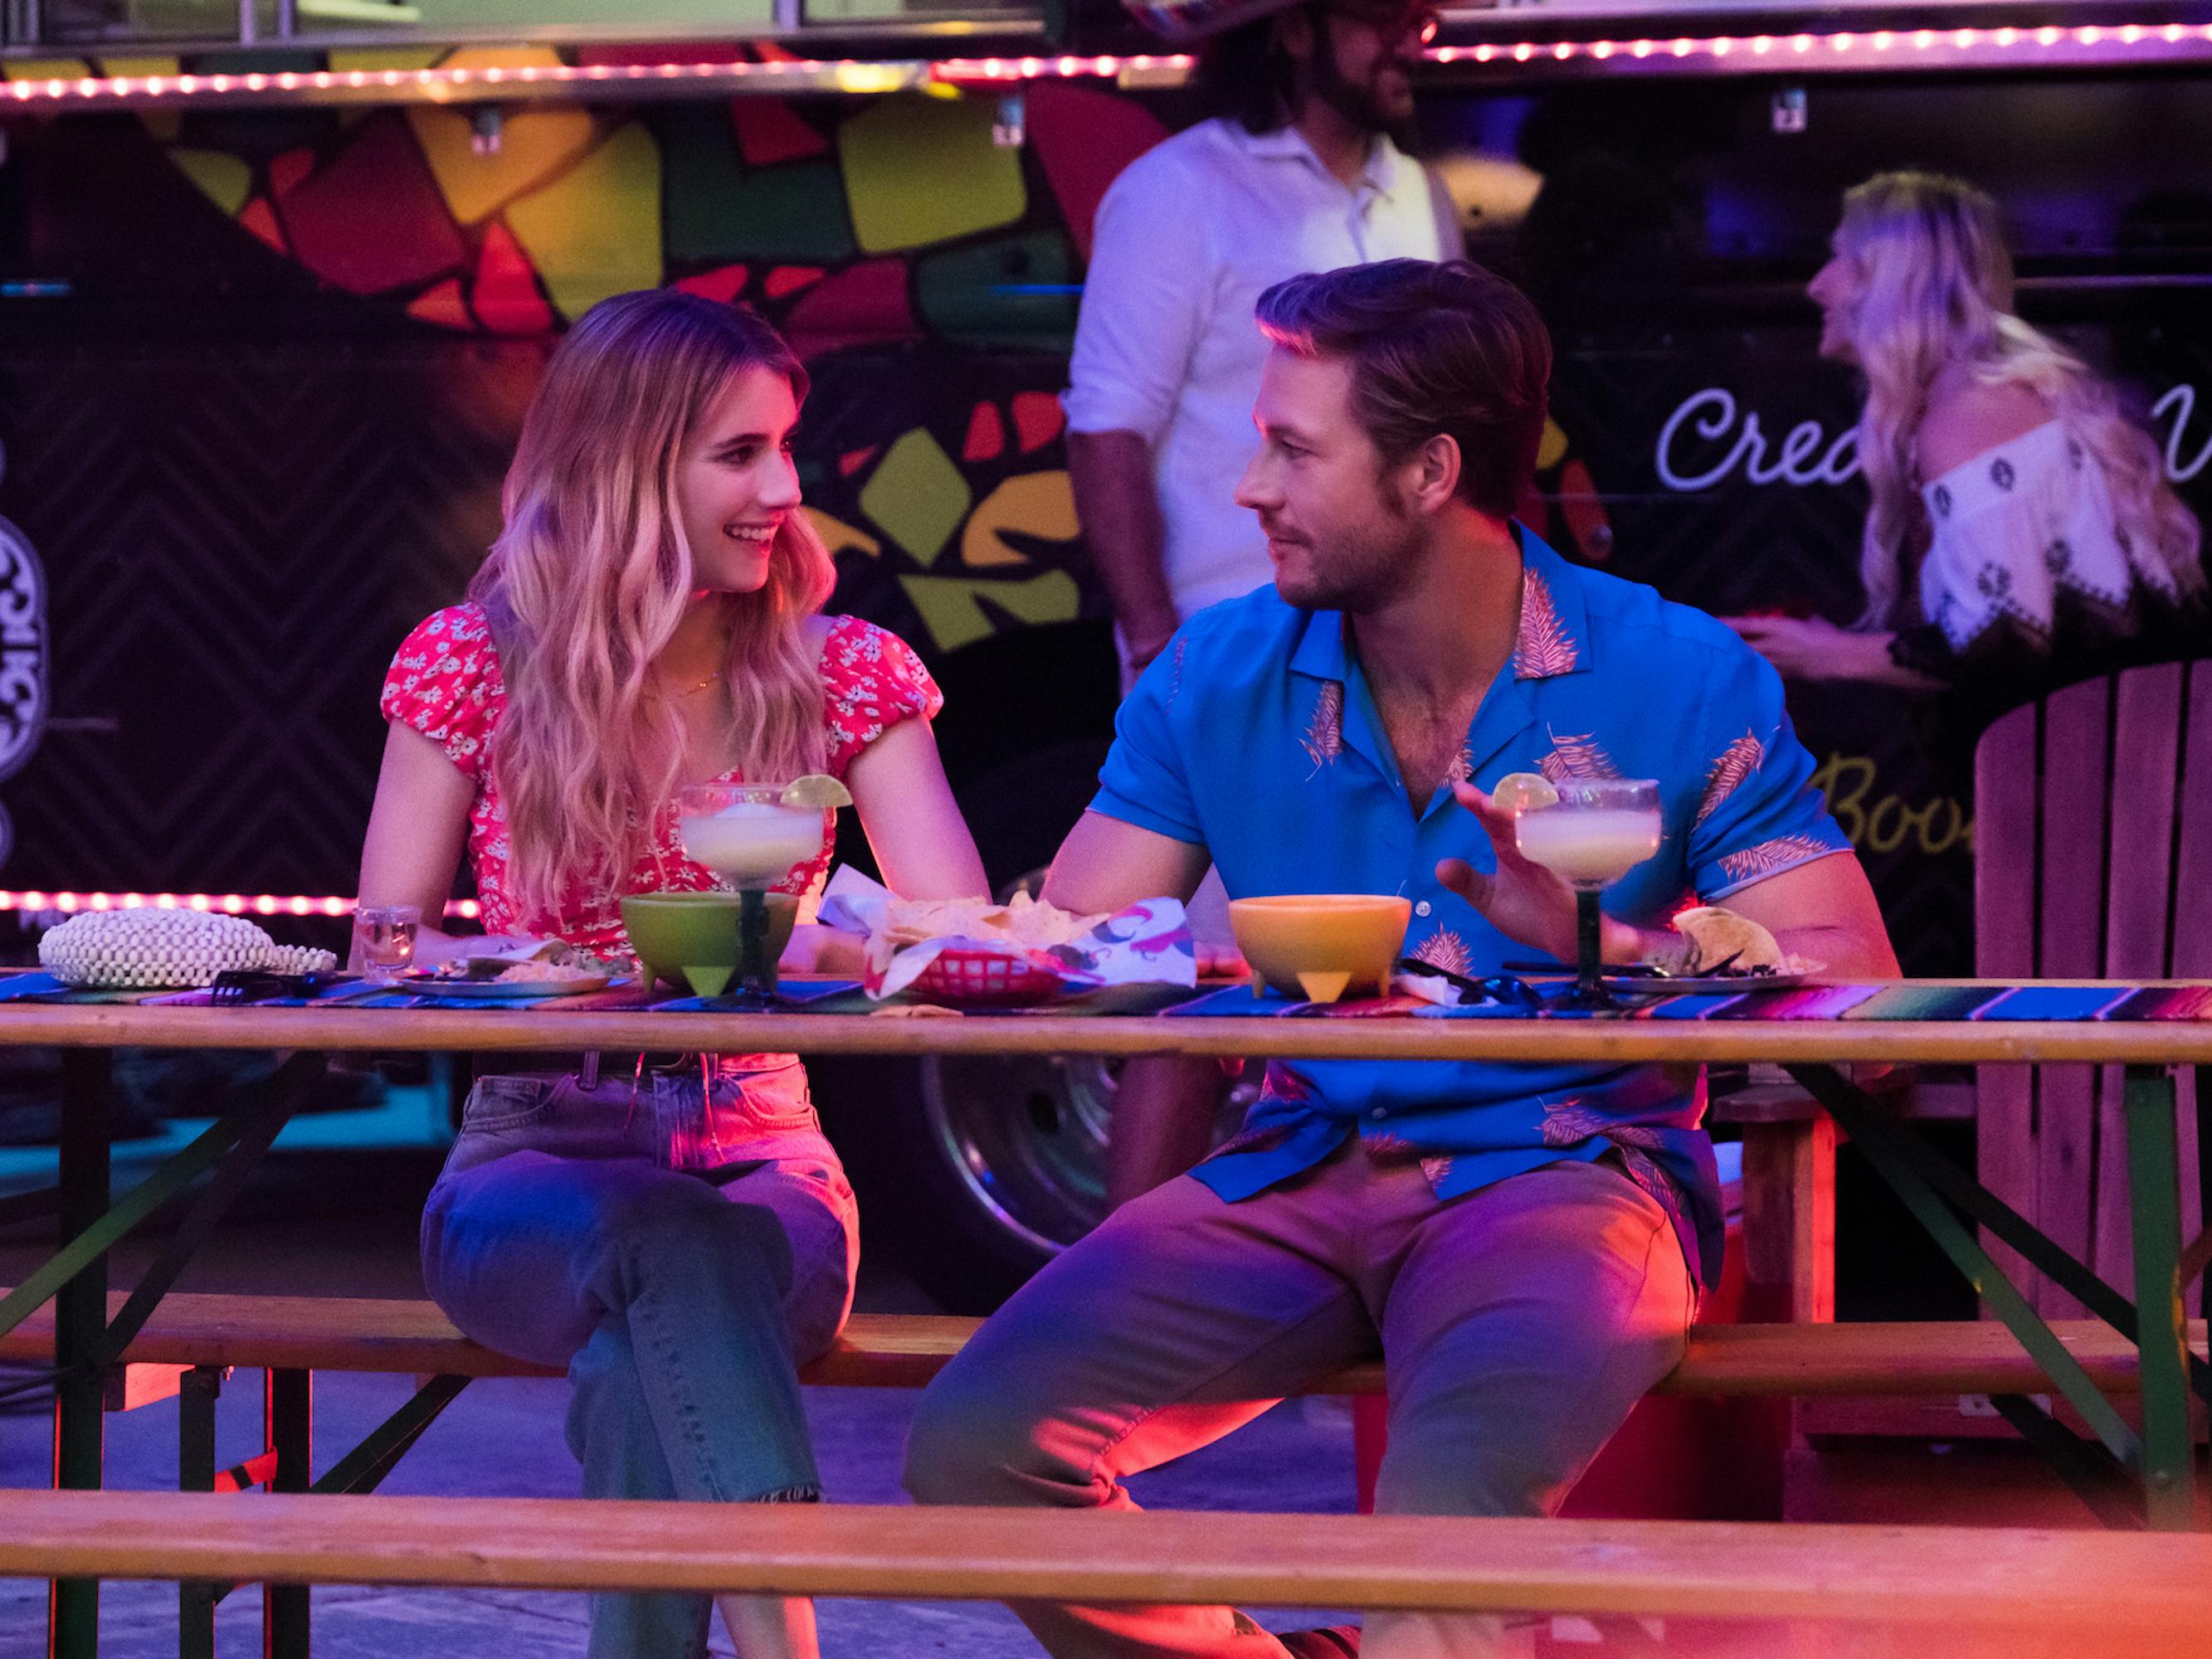 Sloane (Emma Roberts) and Jackson (Like Bracey) sit at a picnic table together.